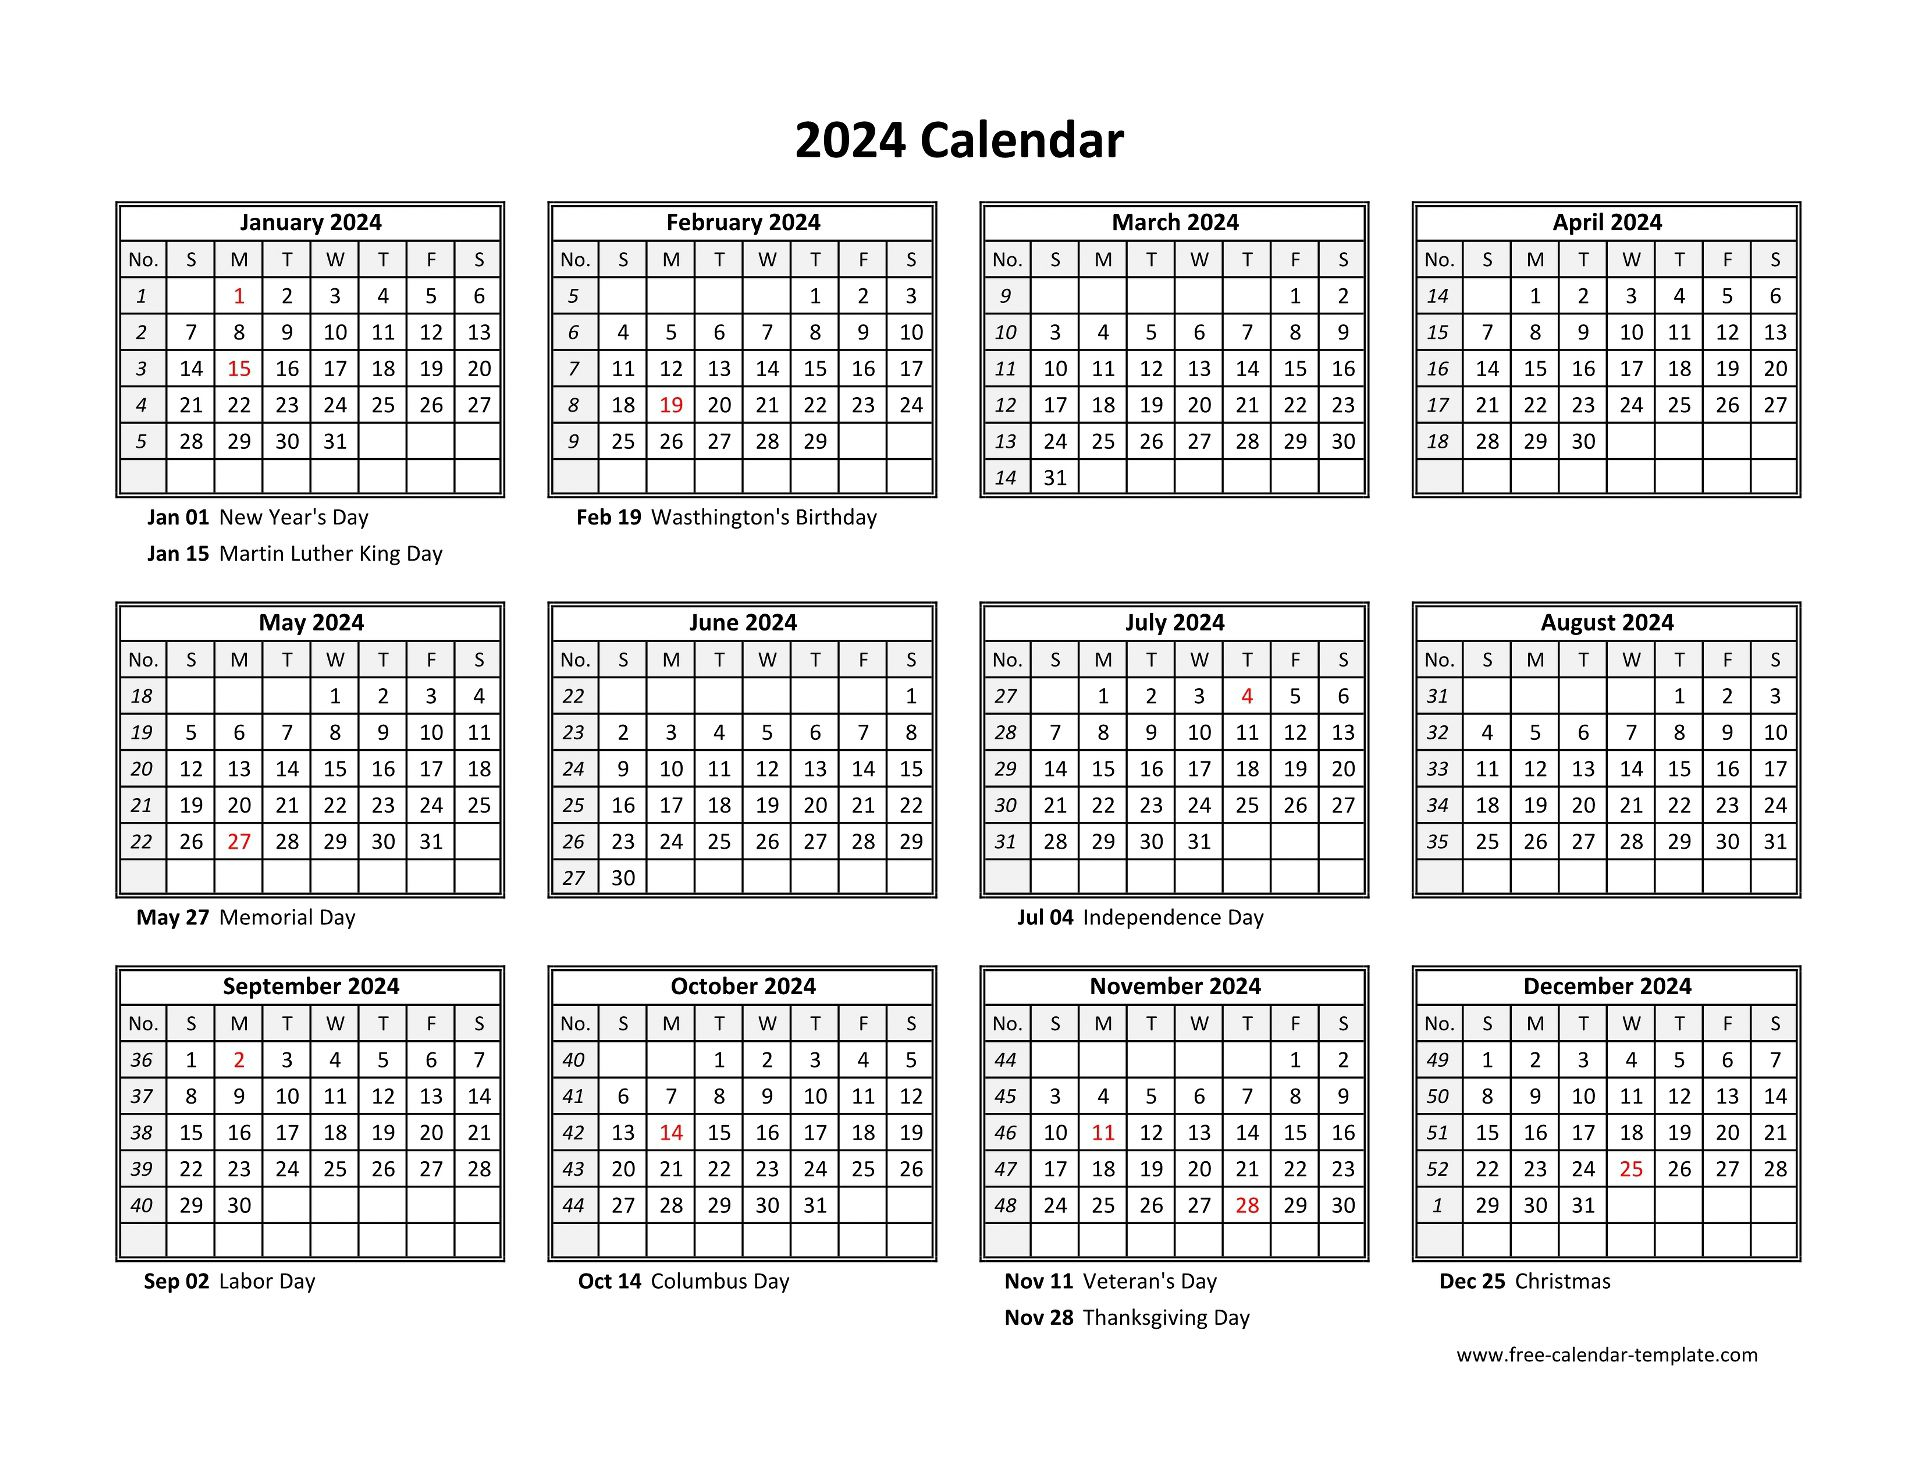 Yearly Calendar 2024 Printable With Federal Holidays | Free for 2024 Yearly Calendar Printable With Holidays